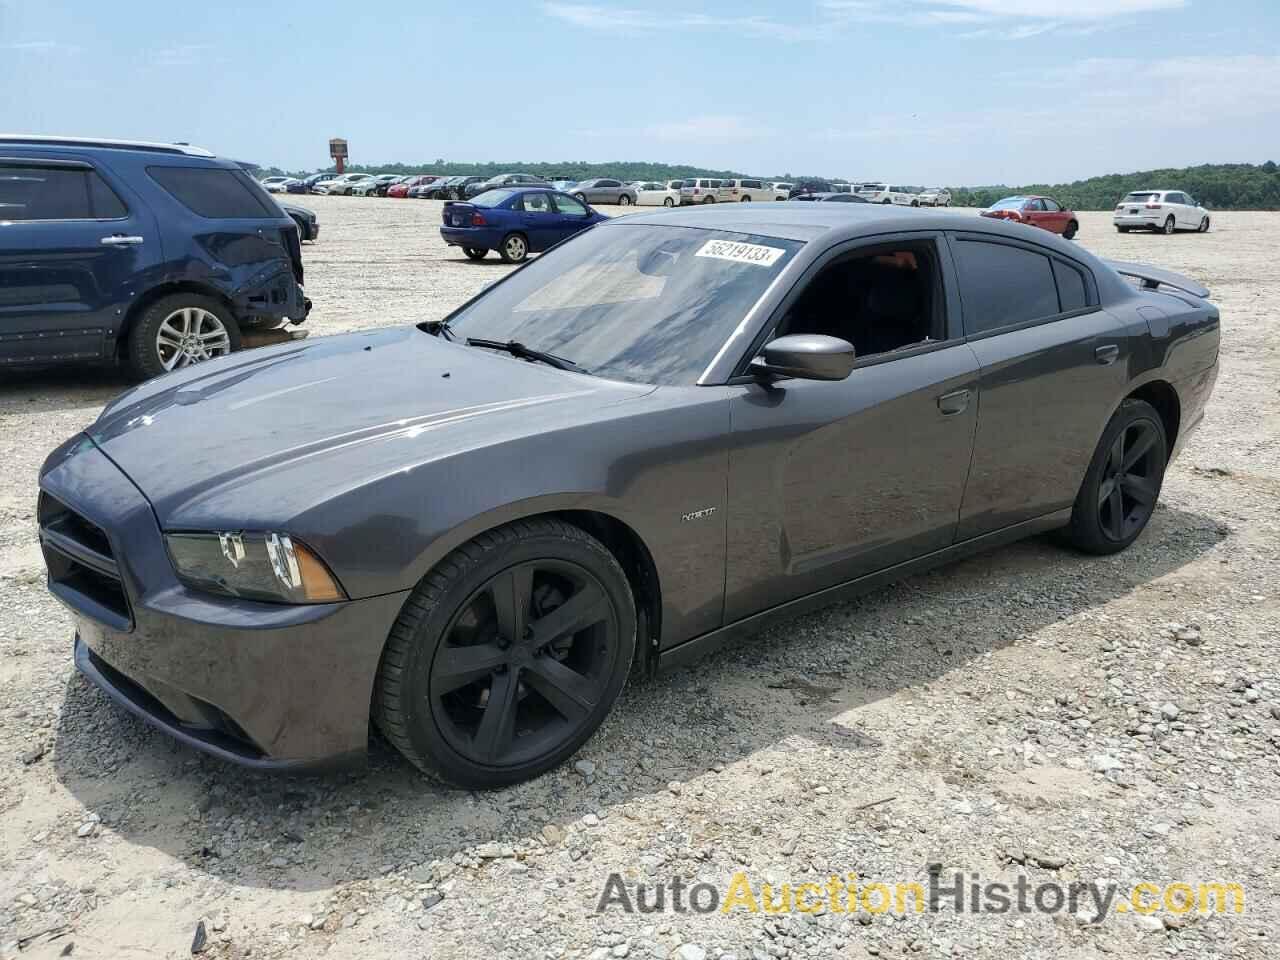 DODGE CHARGER, AL14AN01800051215